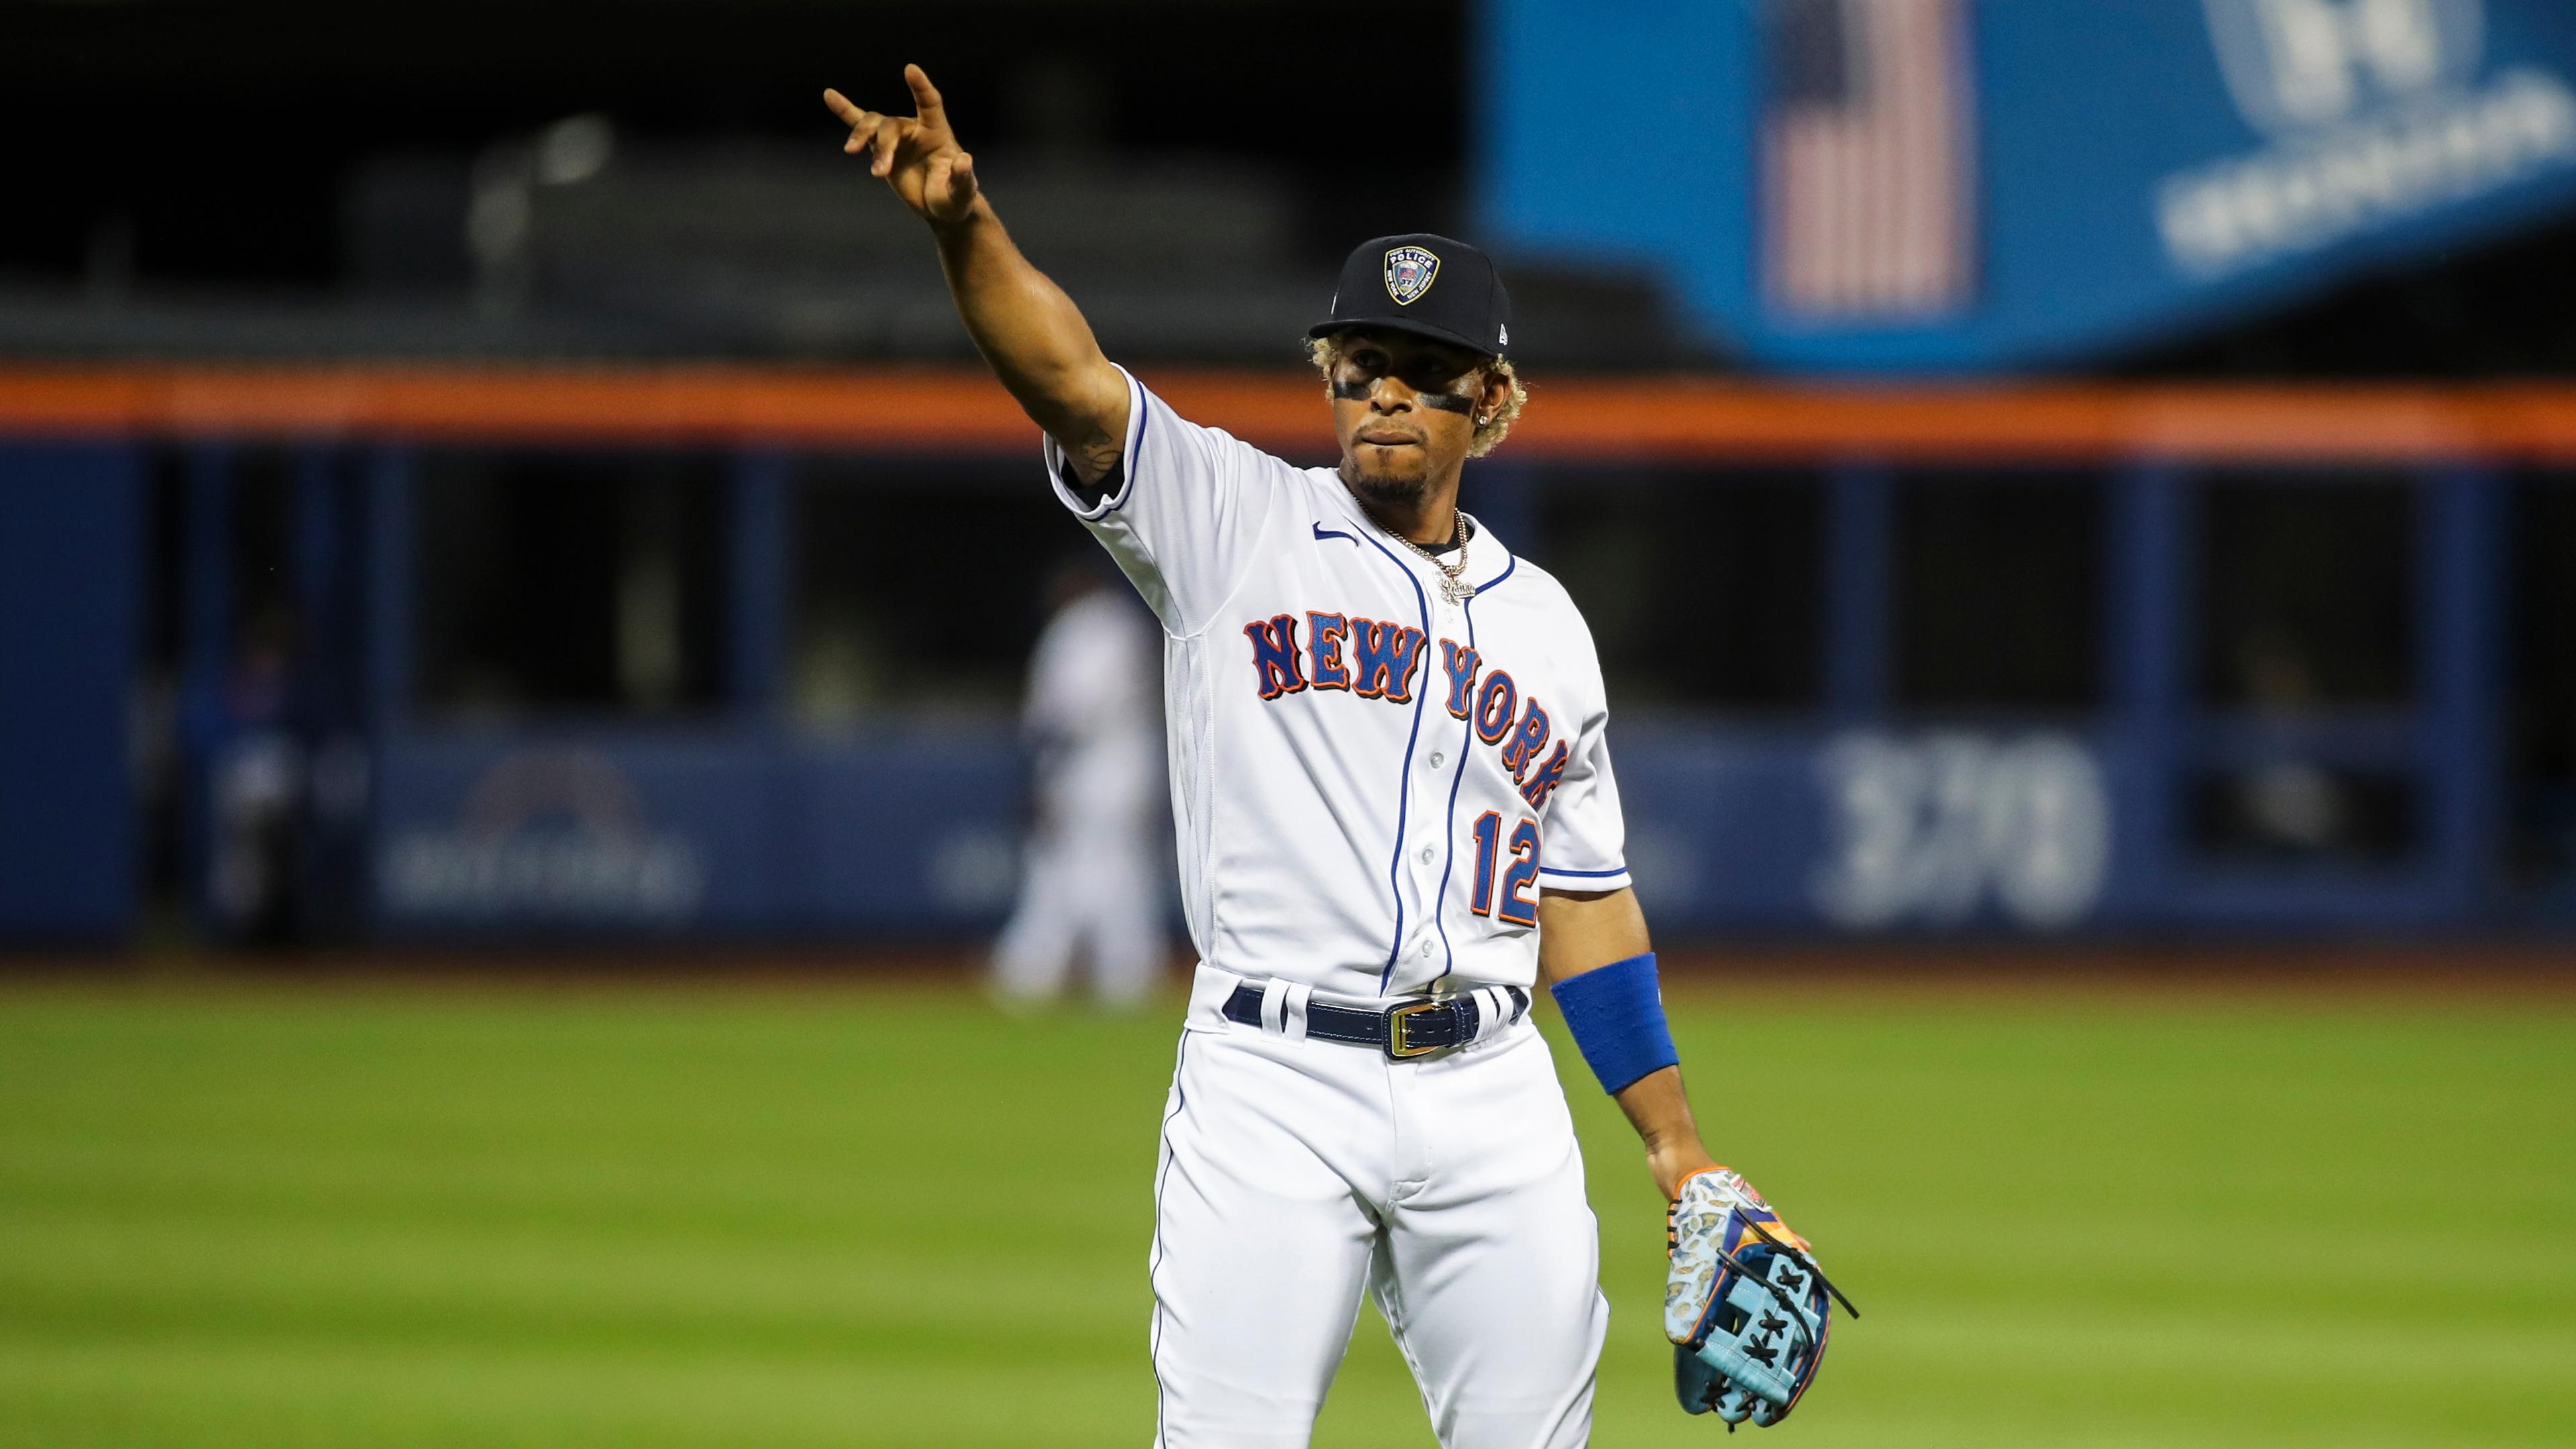 New York Mets shortstop Francisco Lindor (12) waves to the crowd prior to the game against the New York Yankees at Citi Field. / Wendell Cruz-USA TODAY Sports